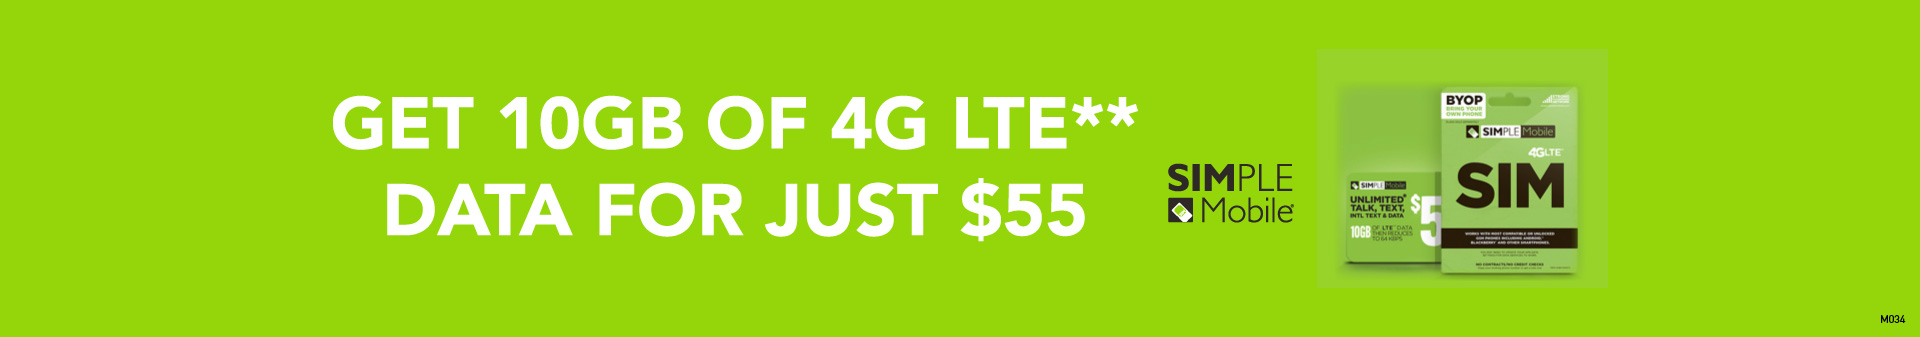 10 GB 4G LTE for $55